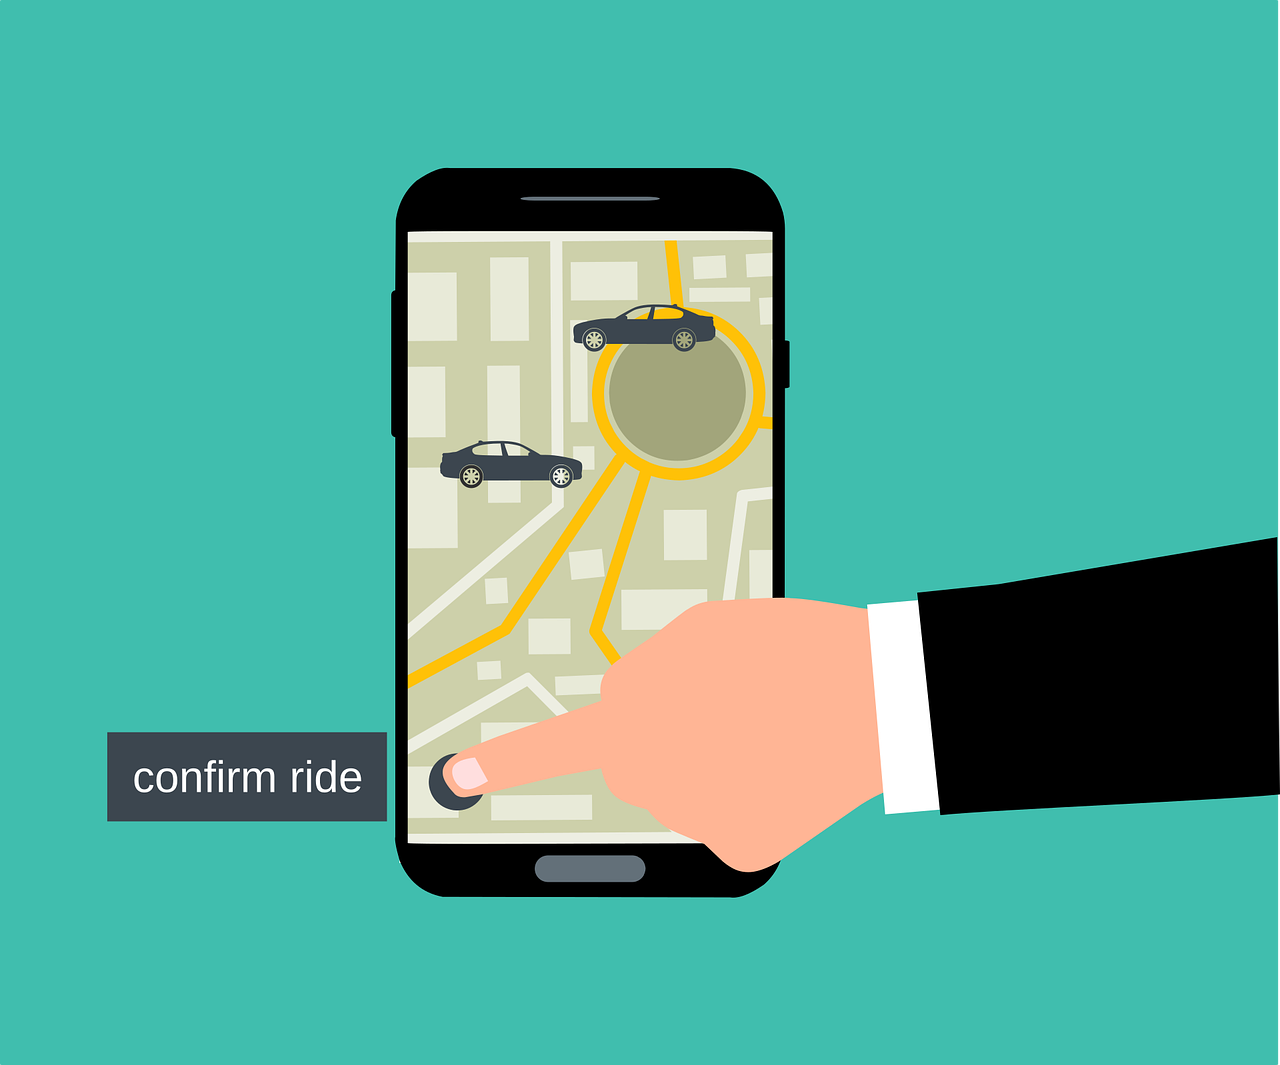 A graphic of a smartphone displaying a rideshare app